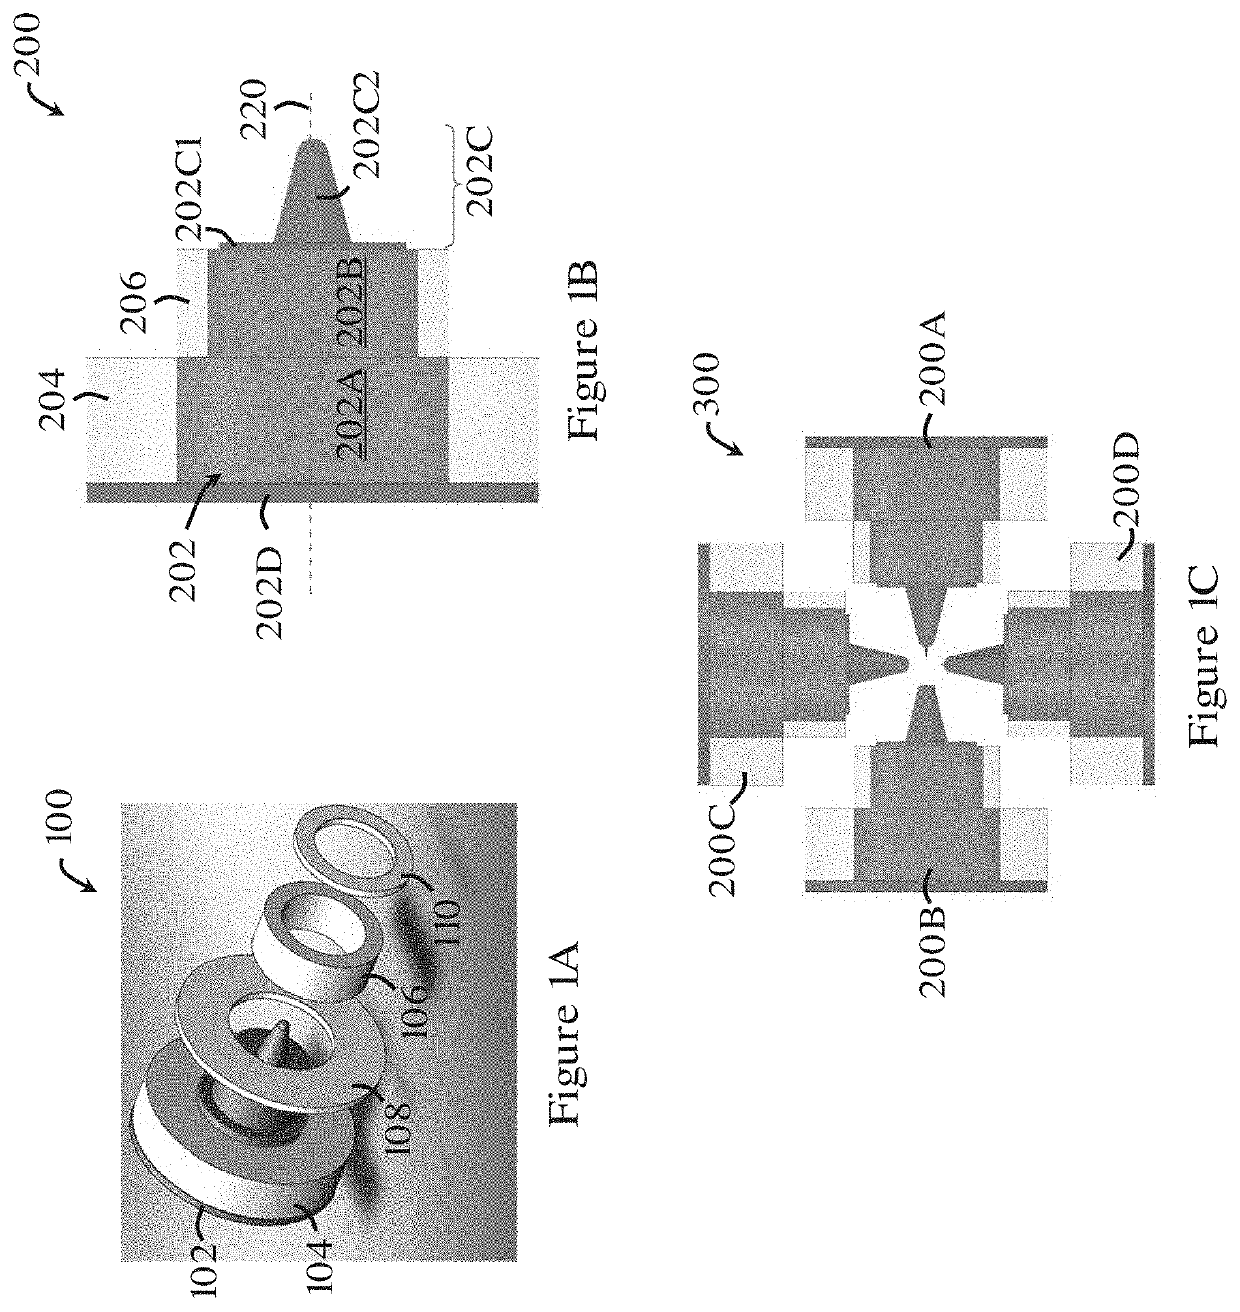 Electromagnetic device for manipulating a magnetic-responsive robotic device